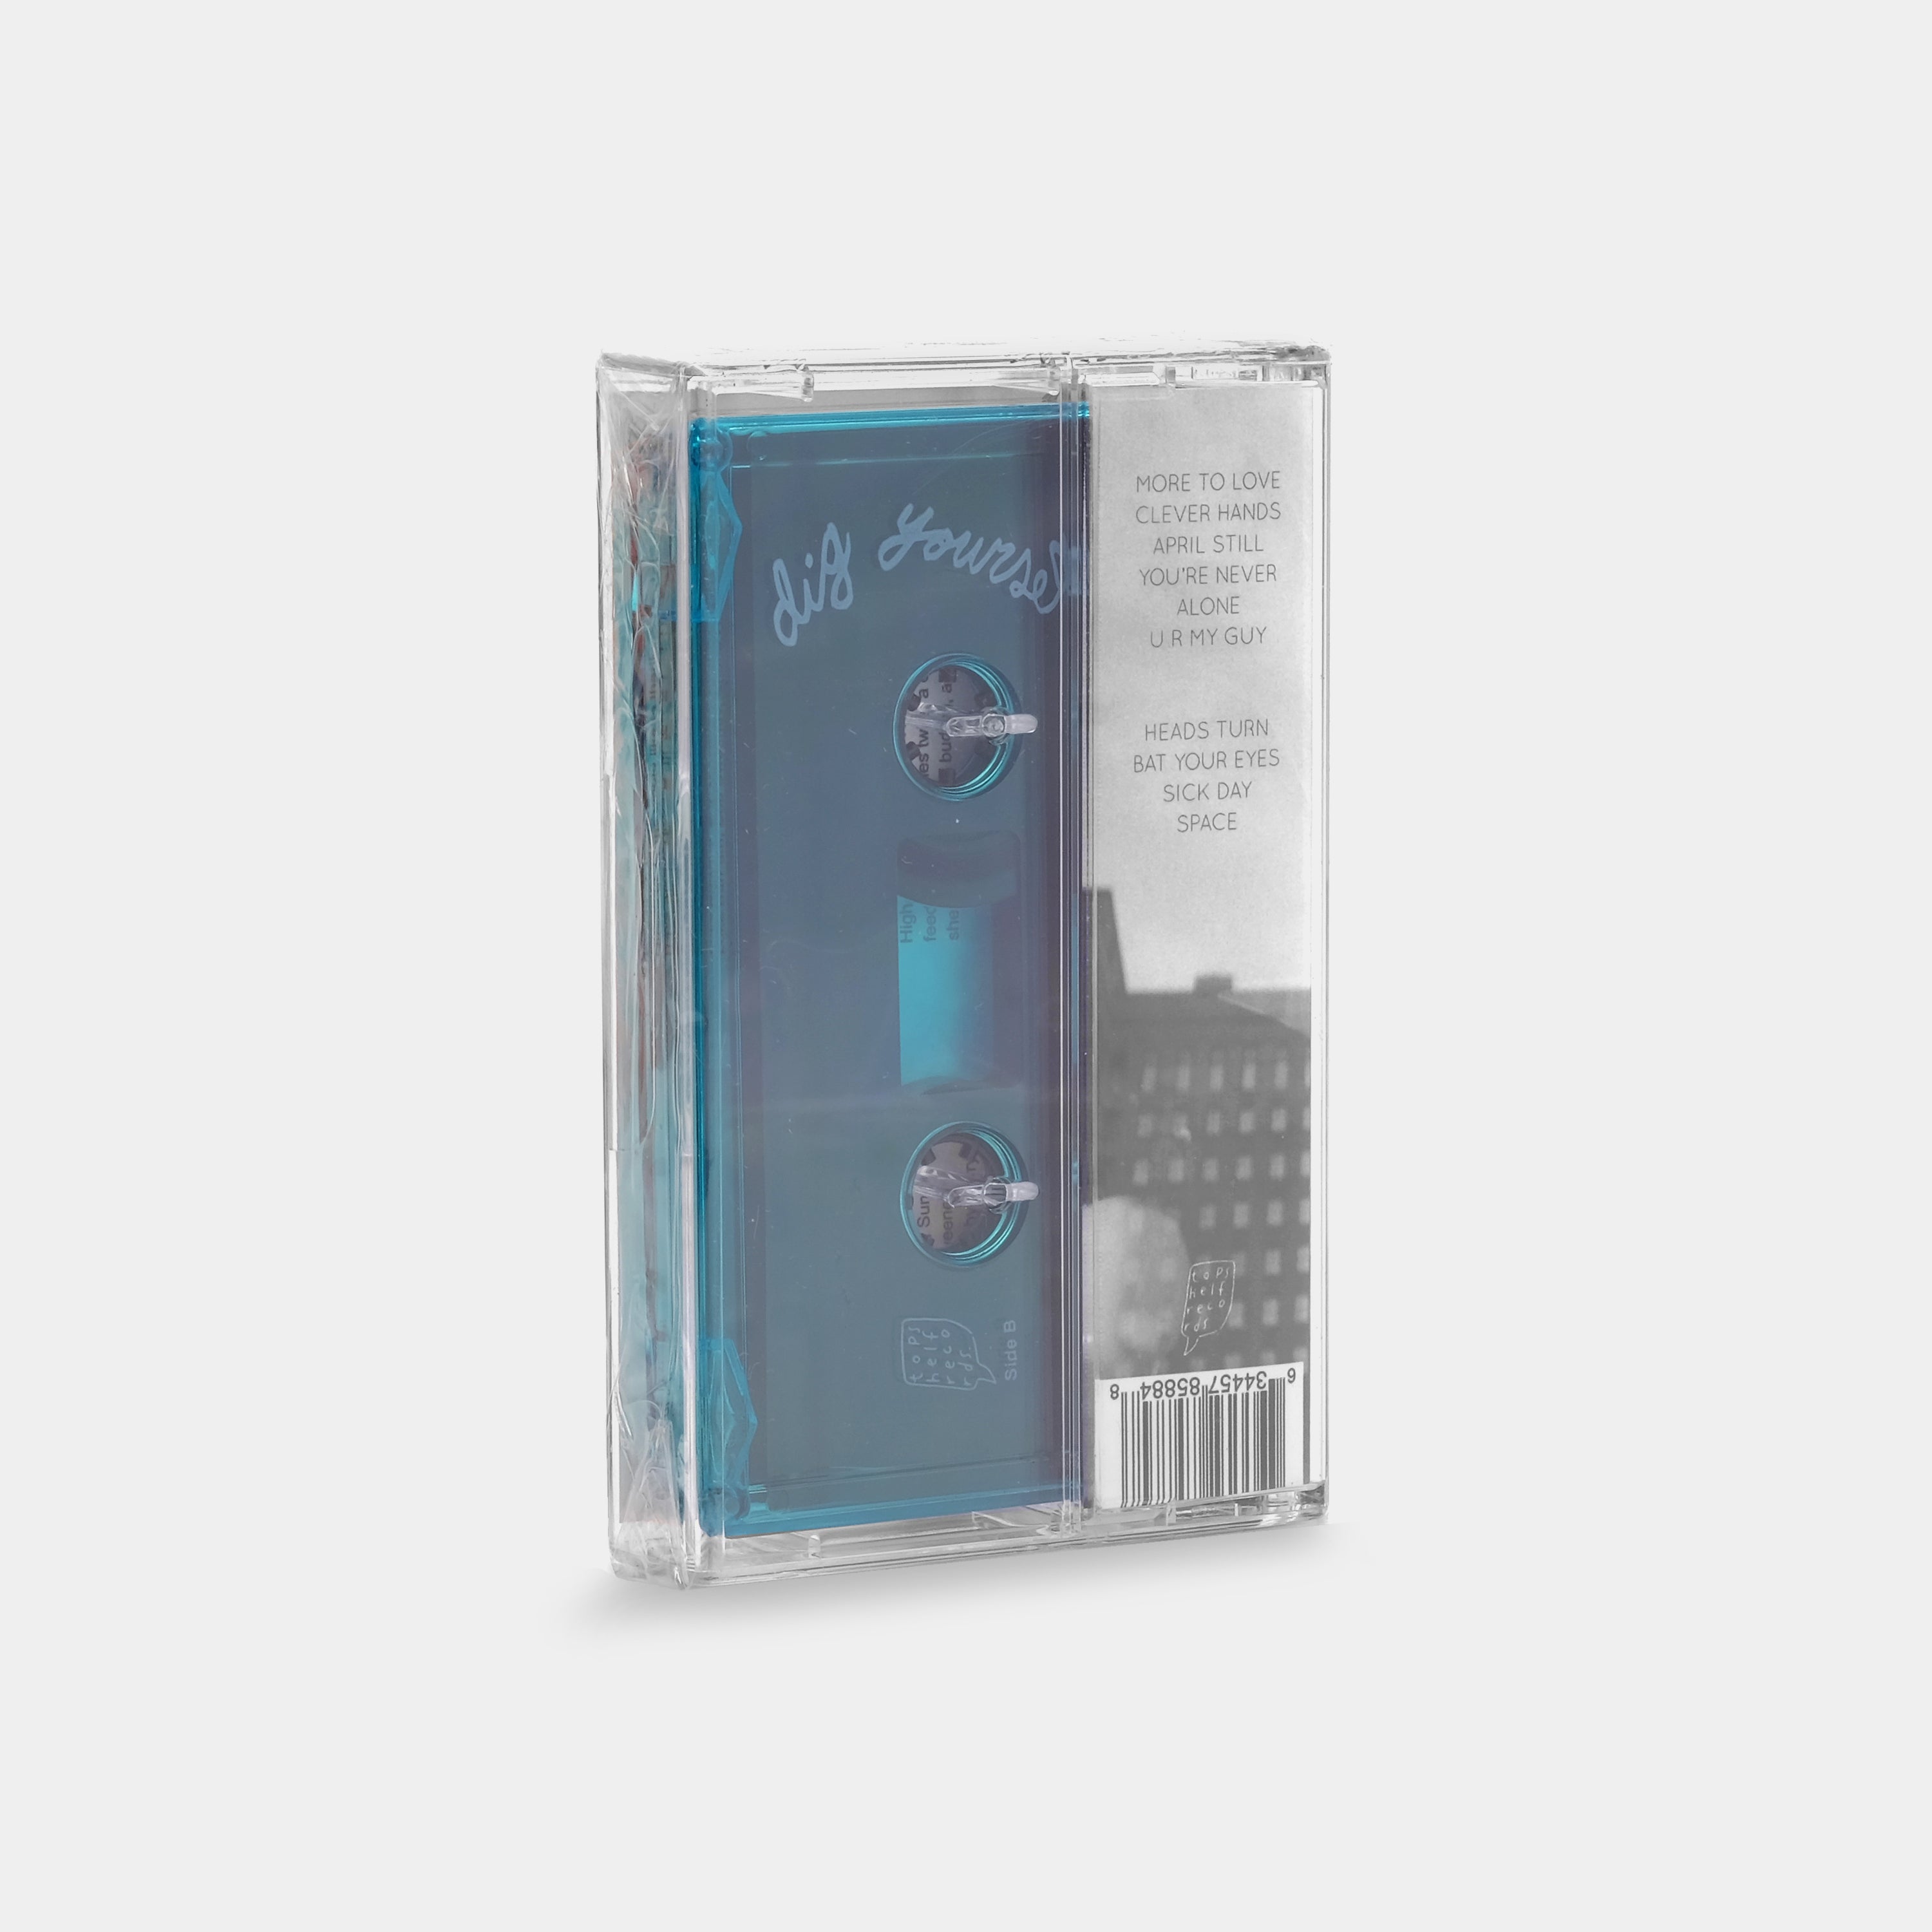 Queen Of Jeans - Dig Yourself Cassette Tape